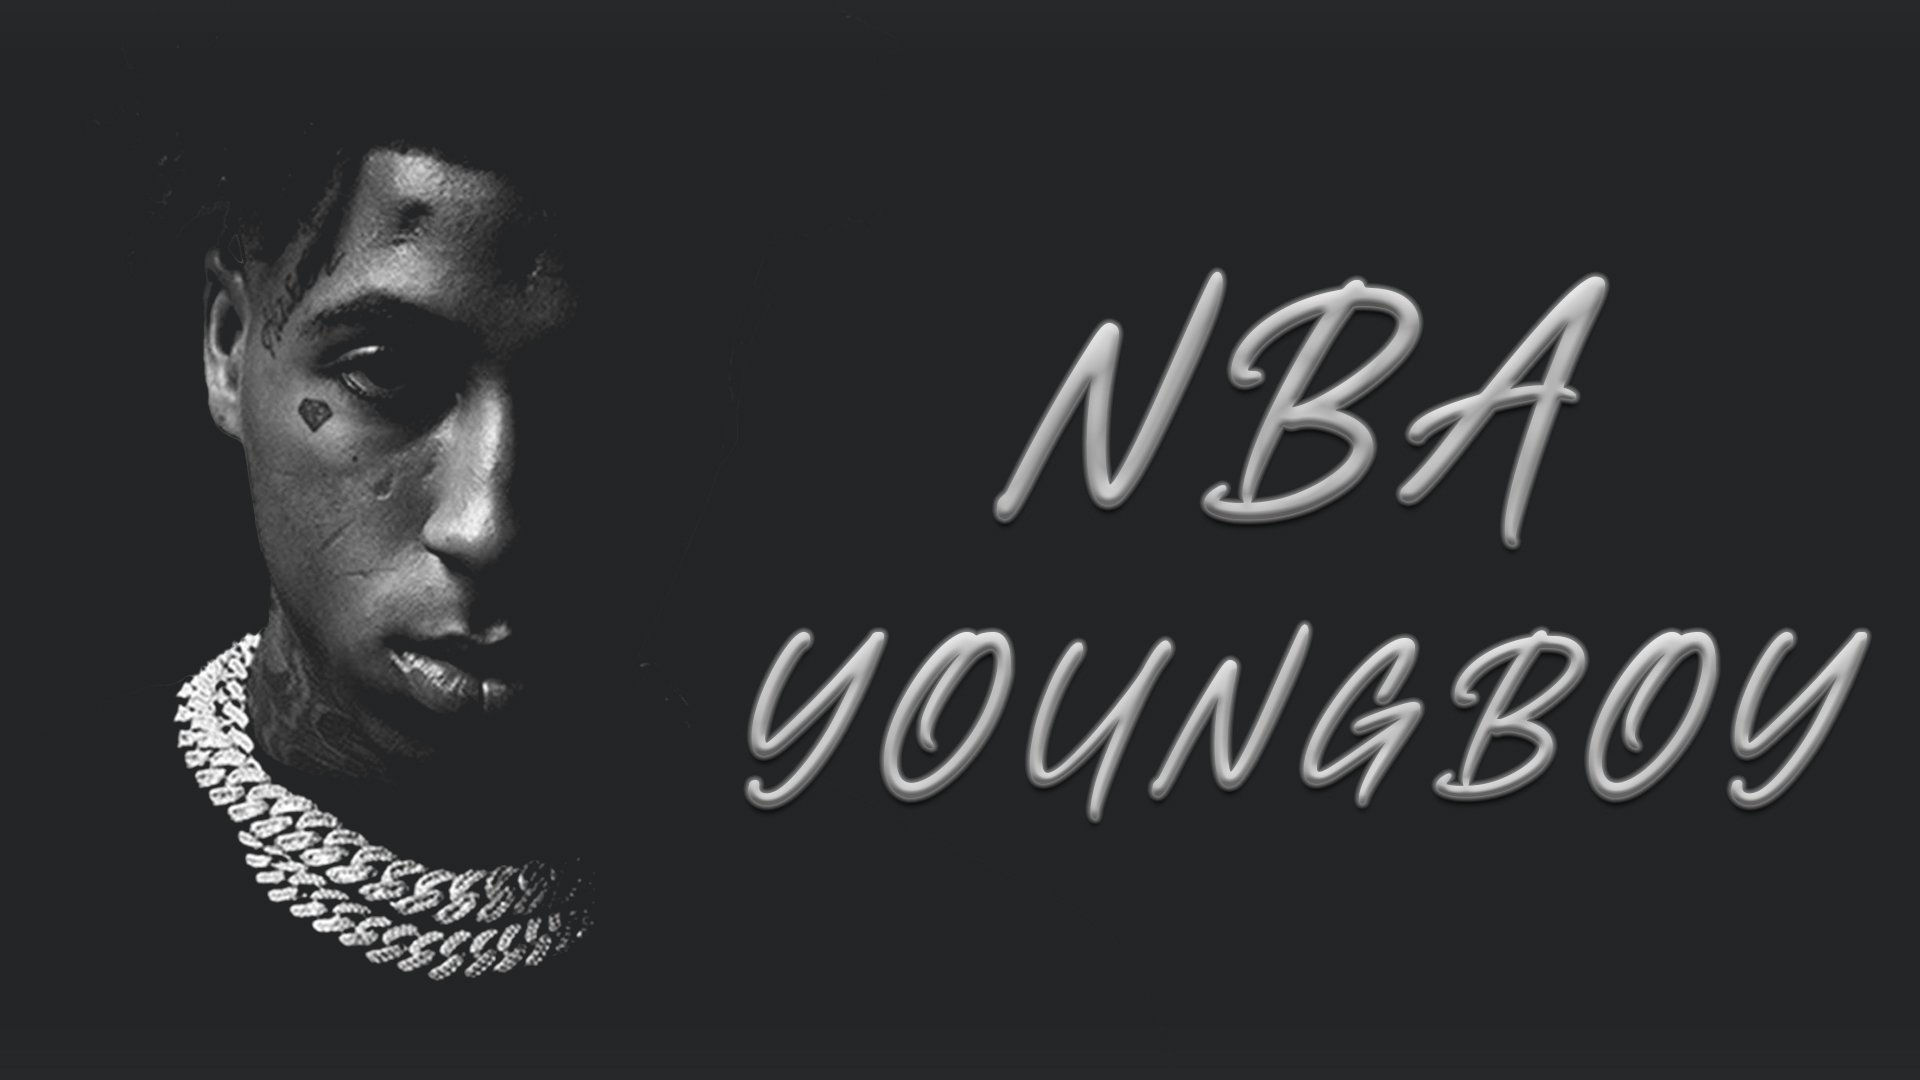 Share 60+ nba youngboy 4kt wallpaper super hot - in.cdgdbentre